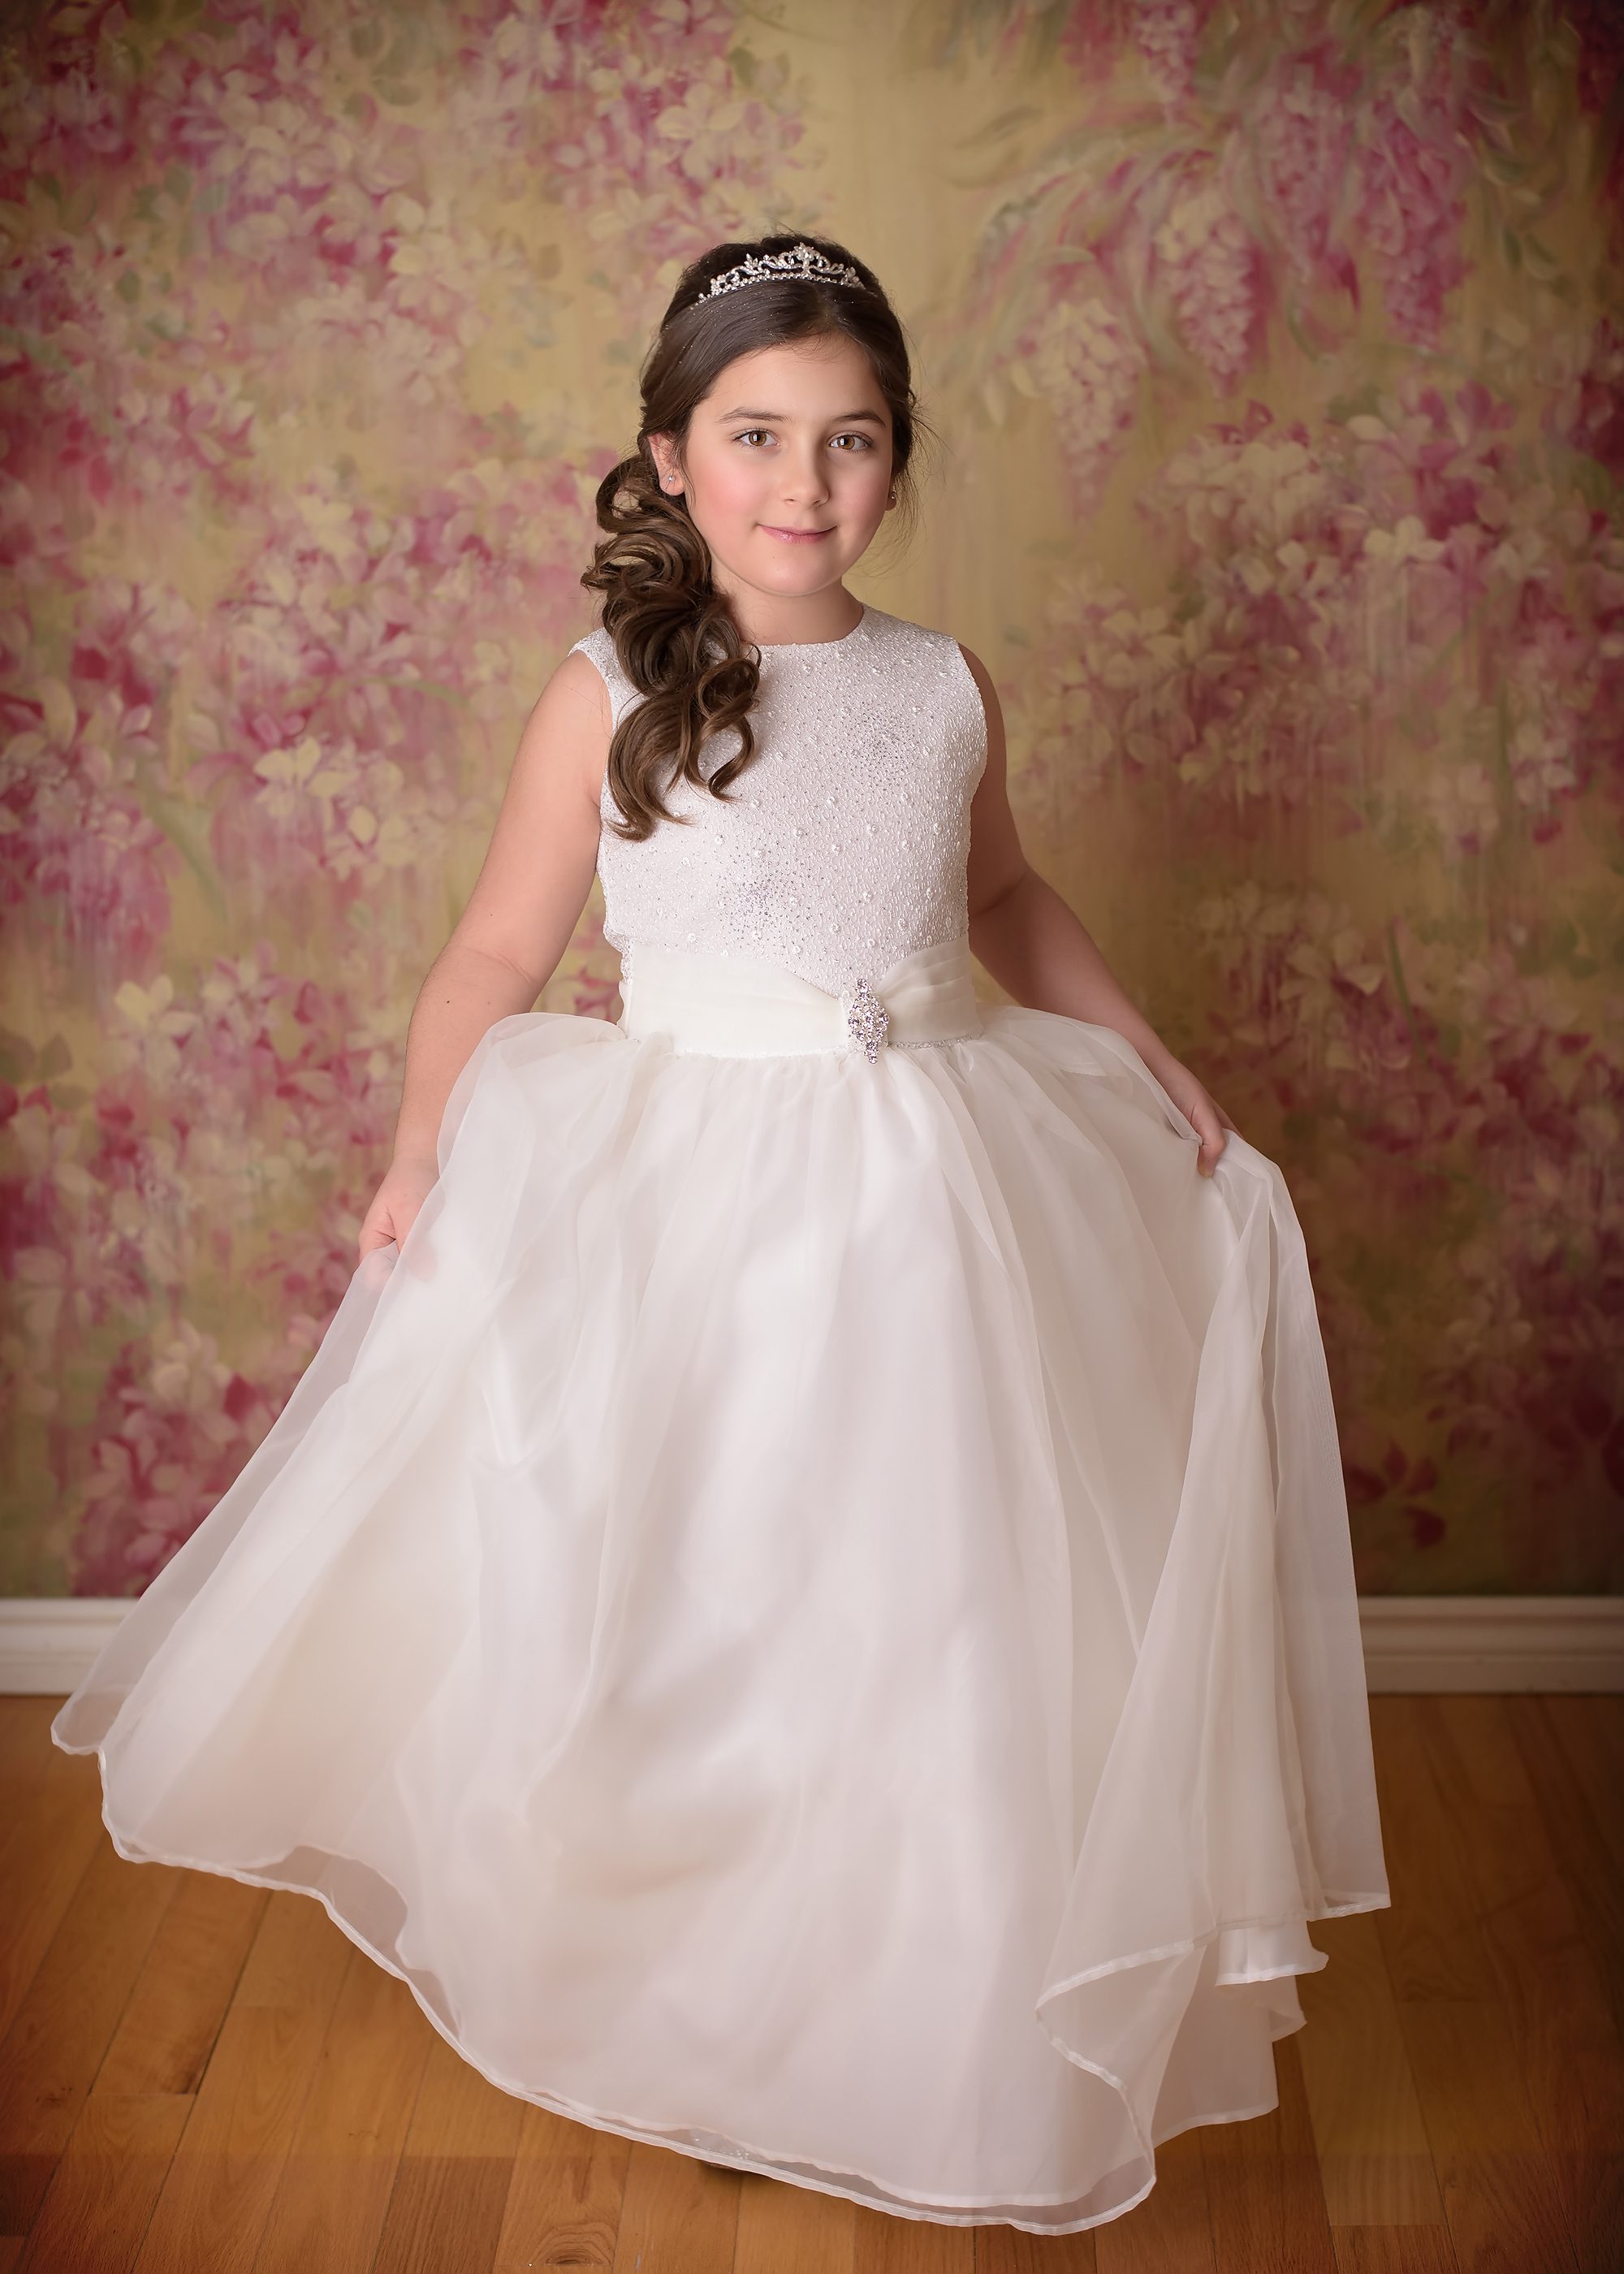 First Communion photo session